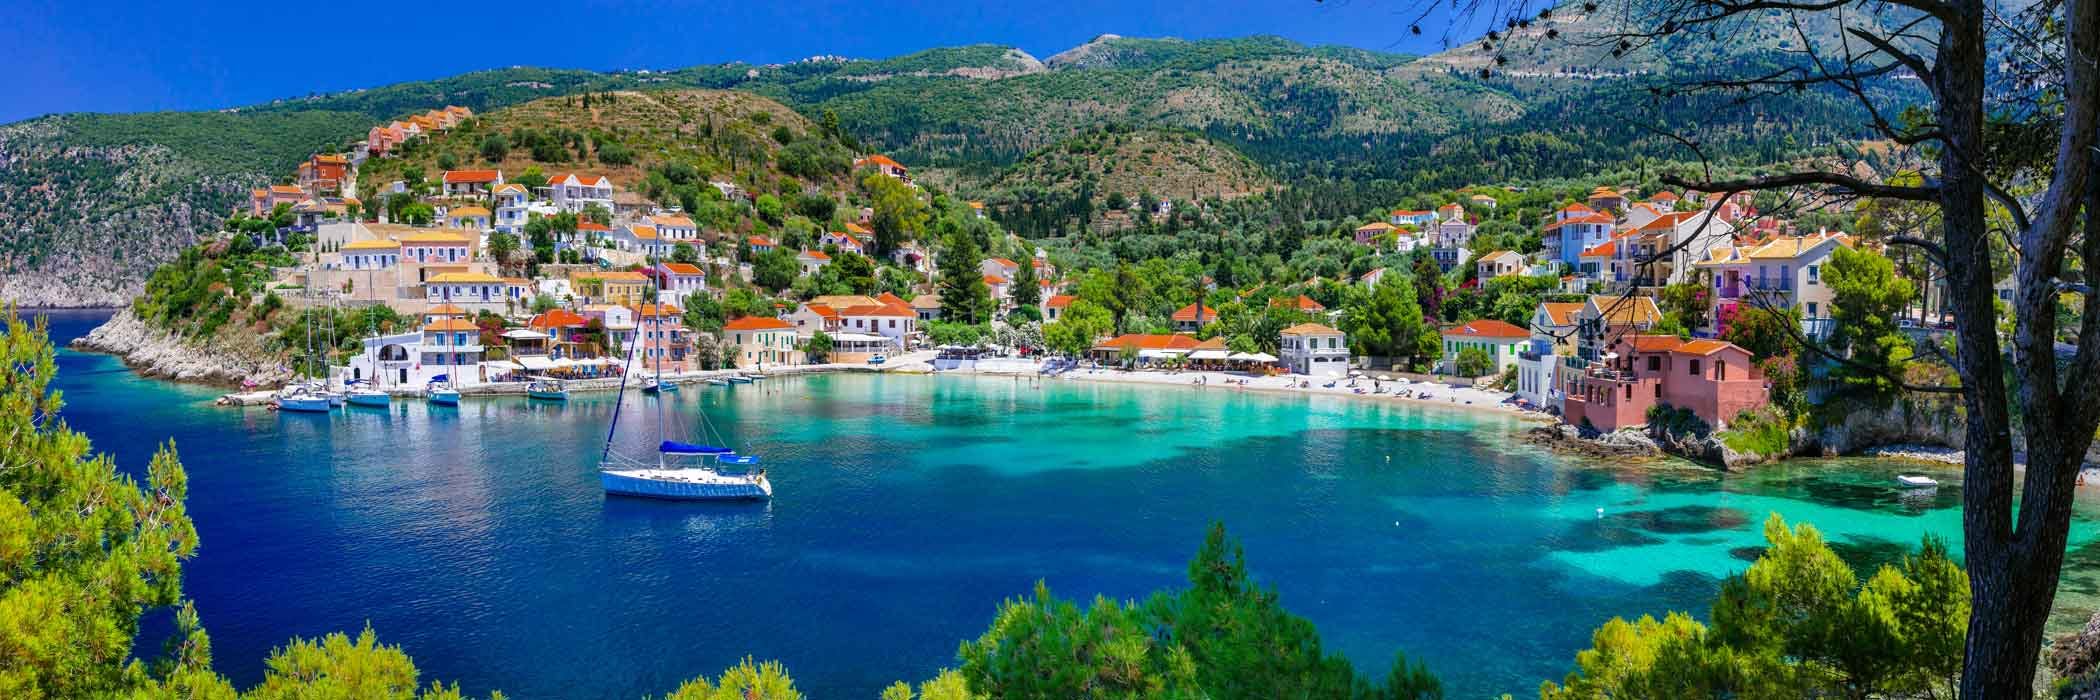 Picture of Kefalonia, Greece - Last Minute Holidays To Greece